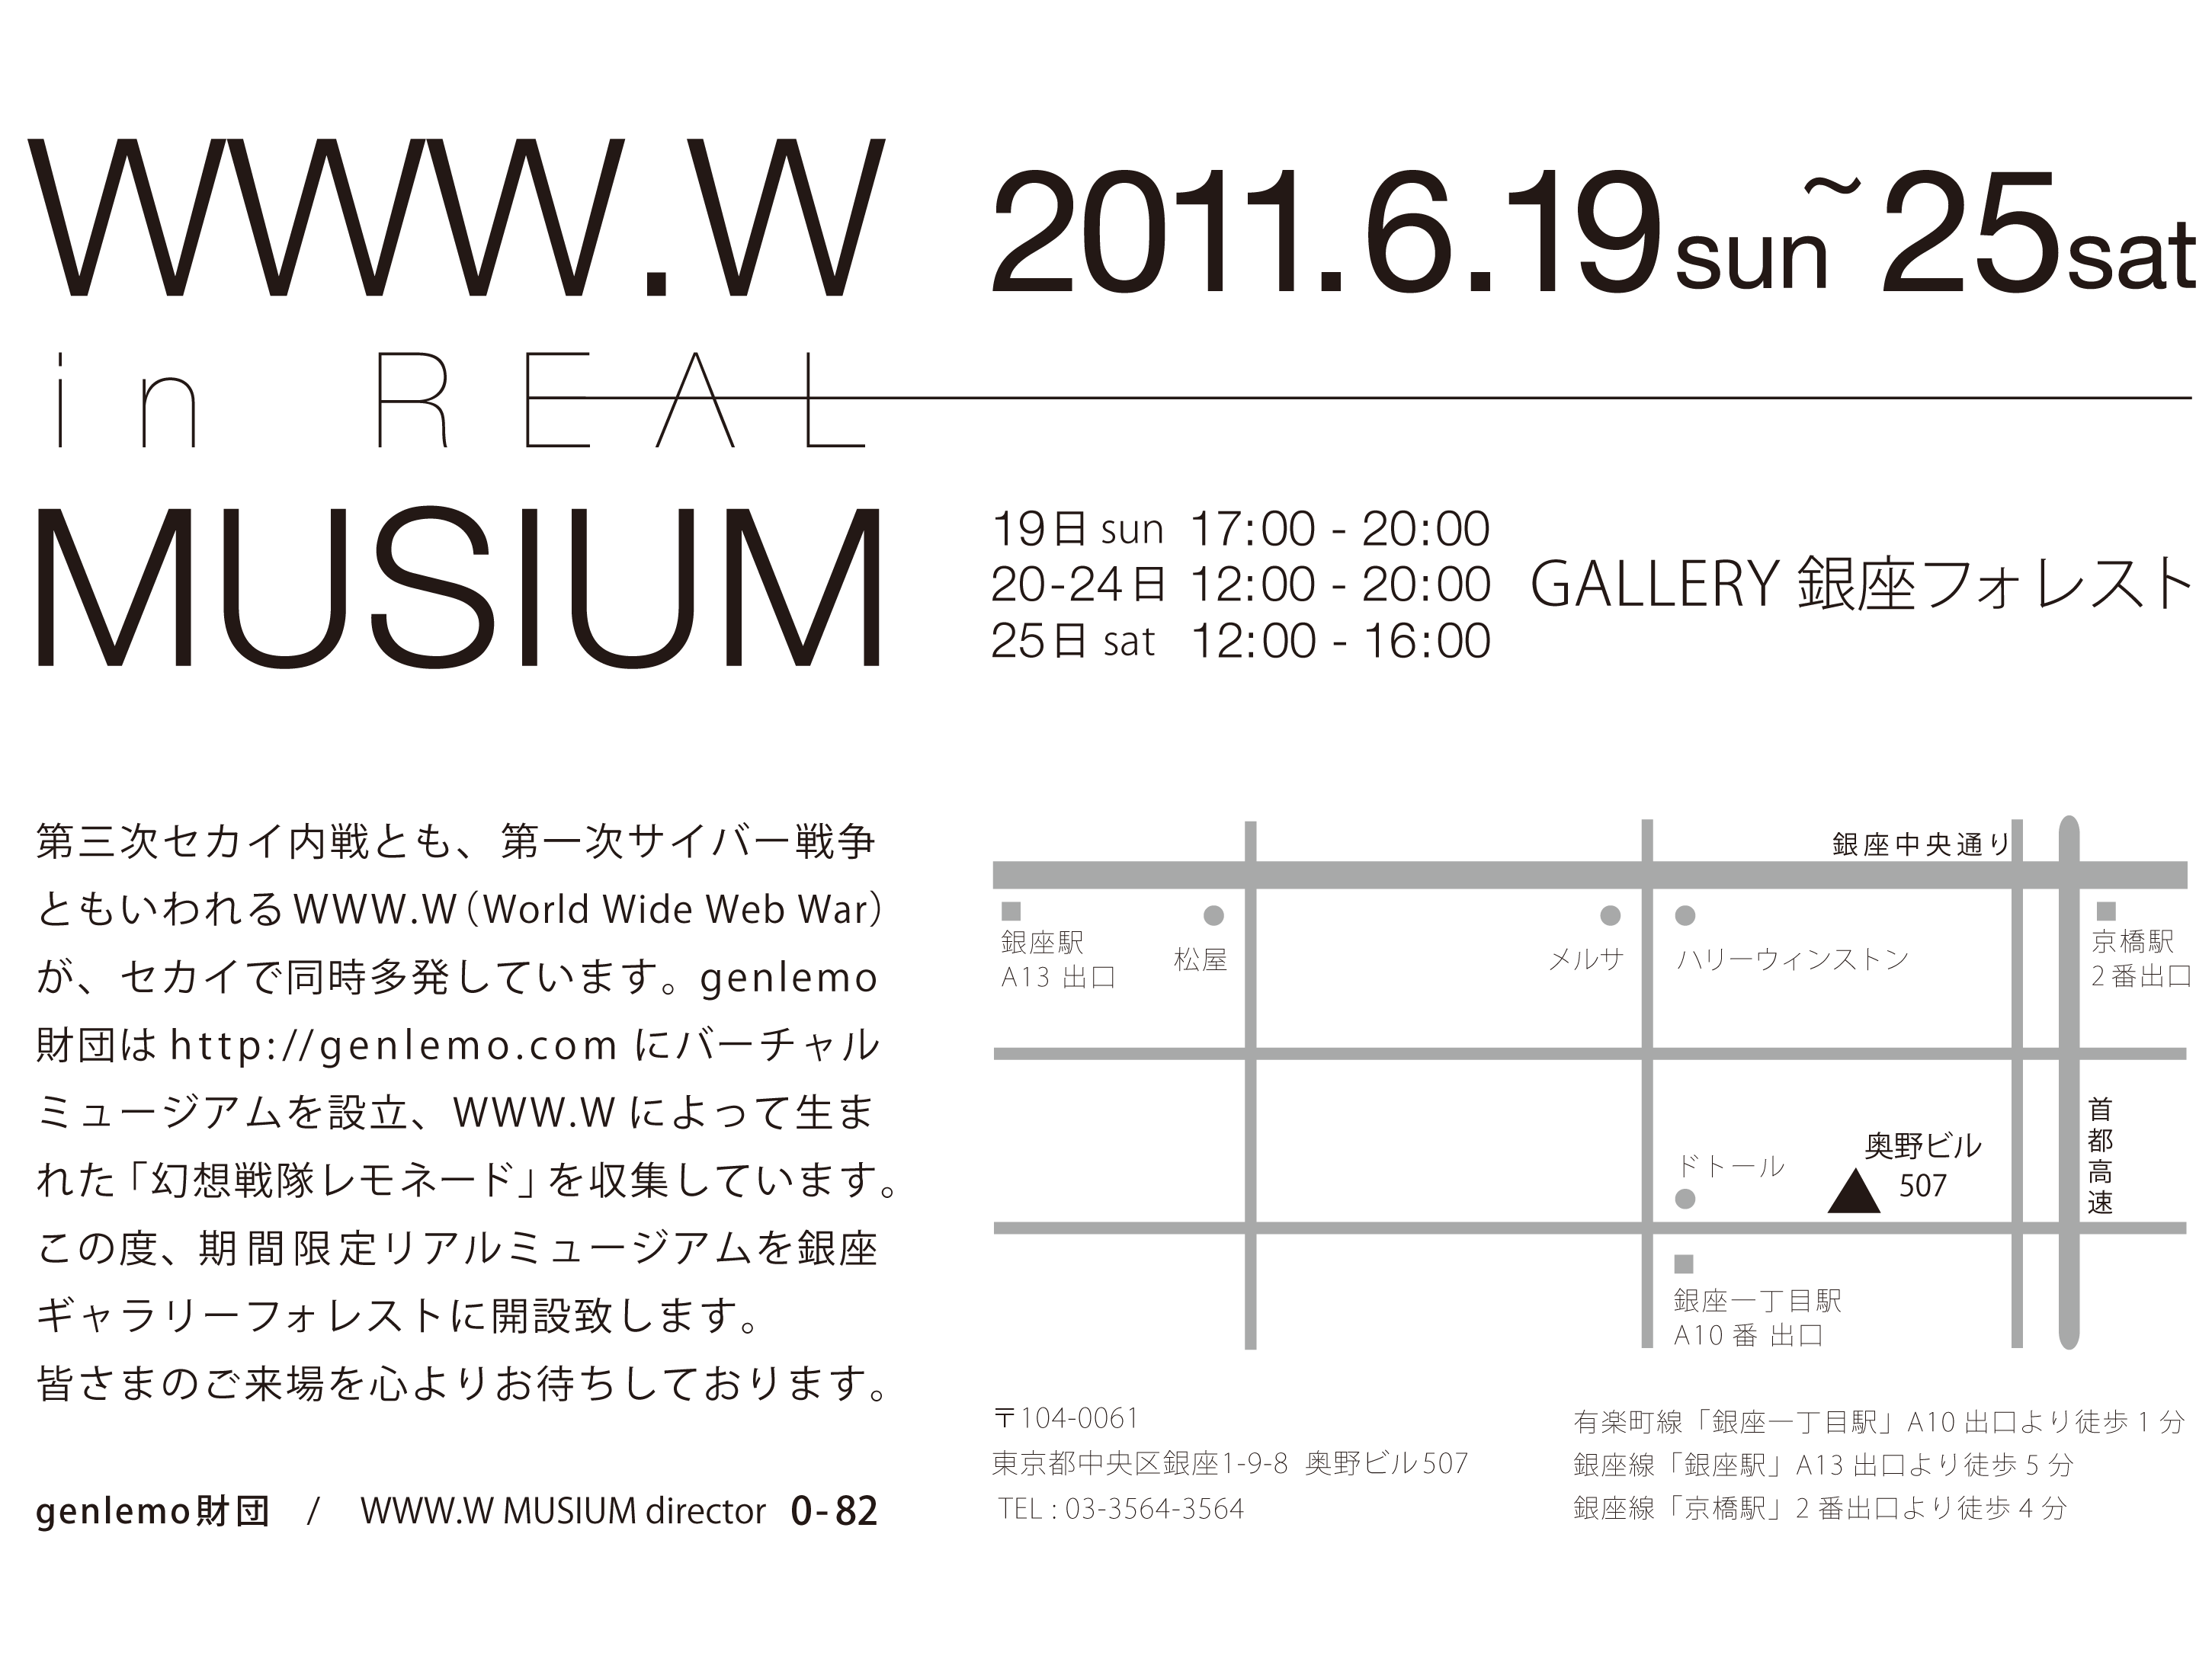 WWW.W MUSIUM in REAL